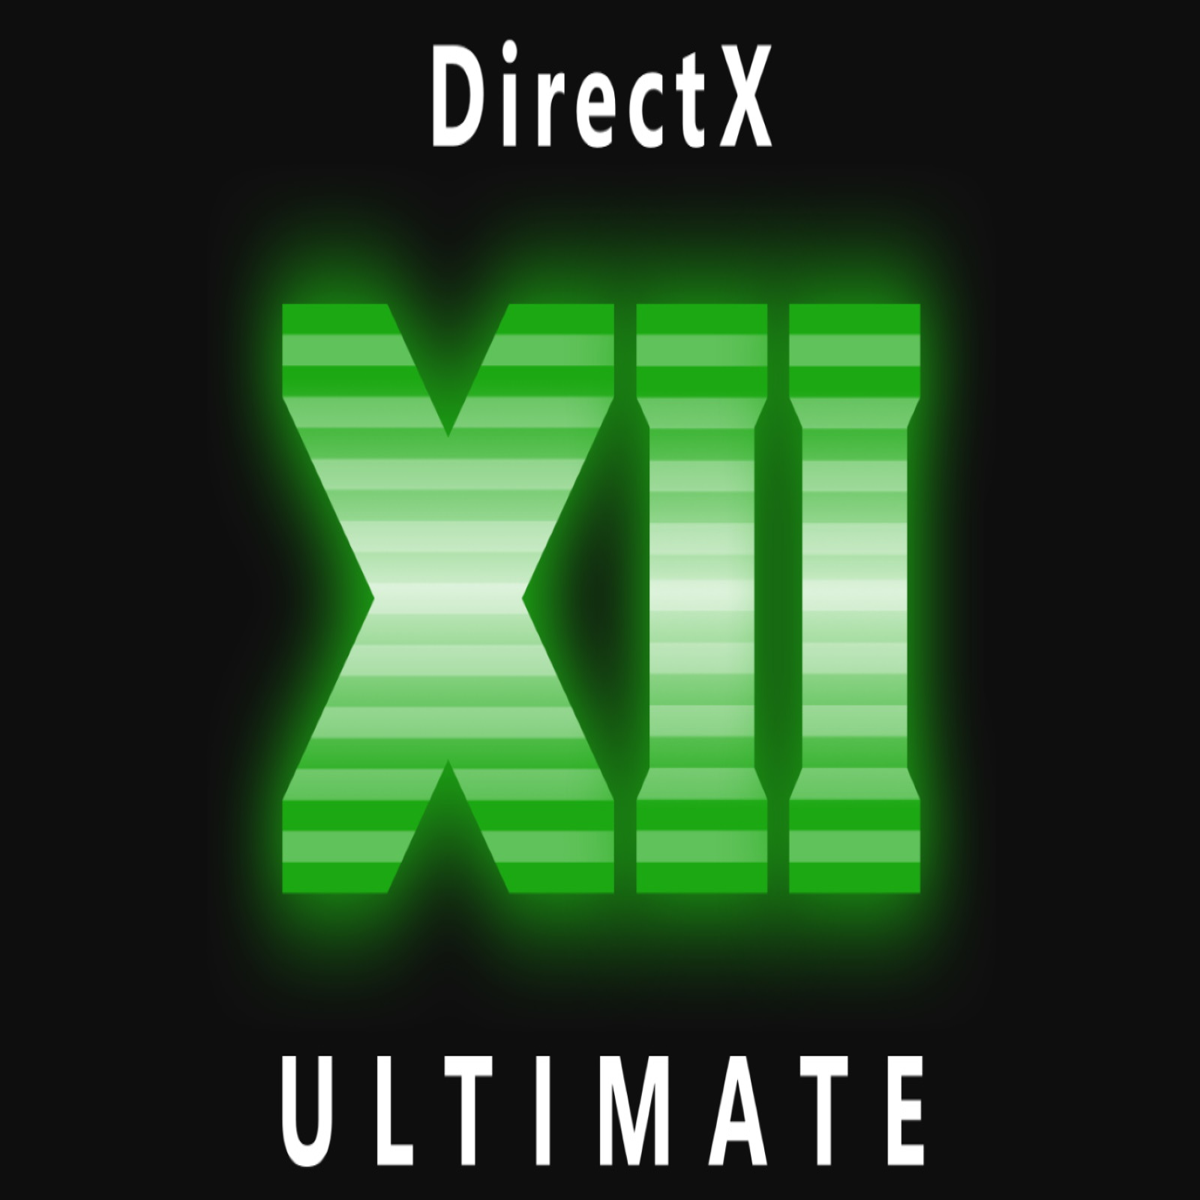 DirectX 12 Ultimate is here to level up the graphics on your